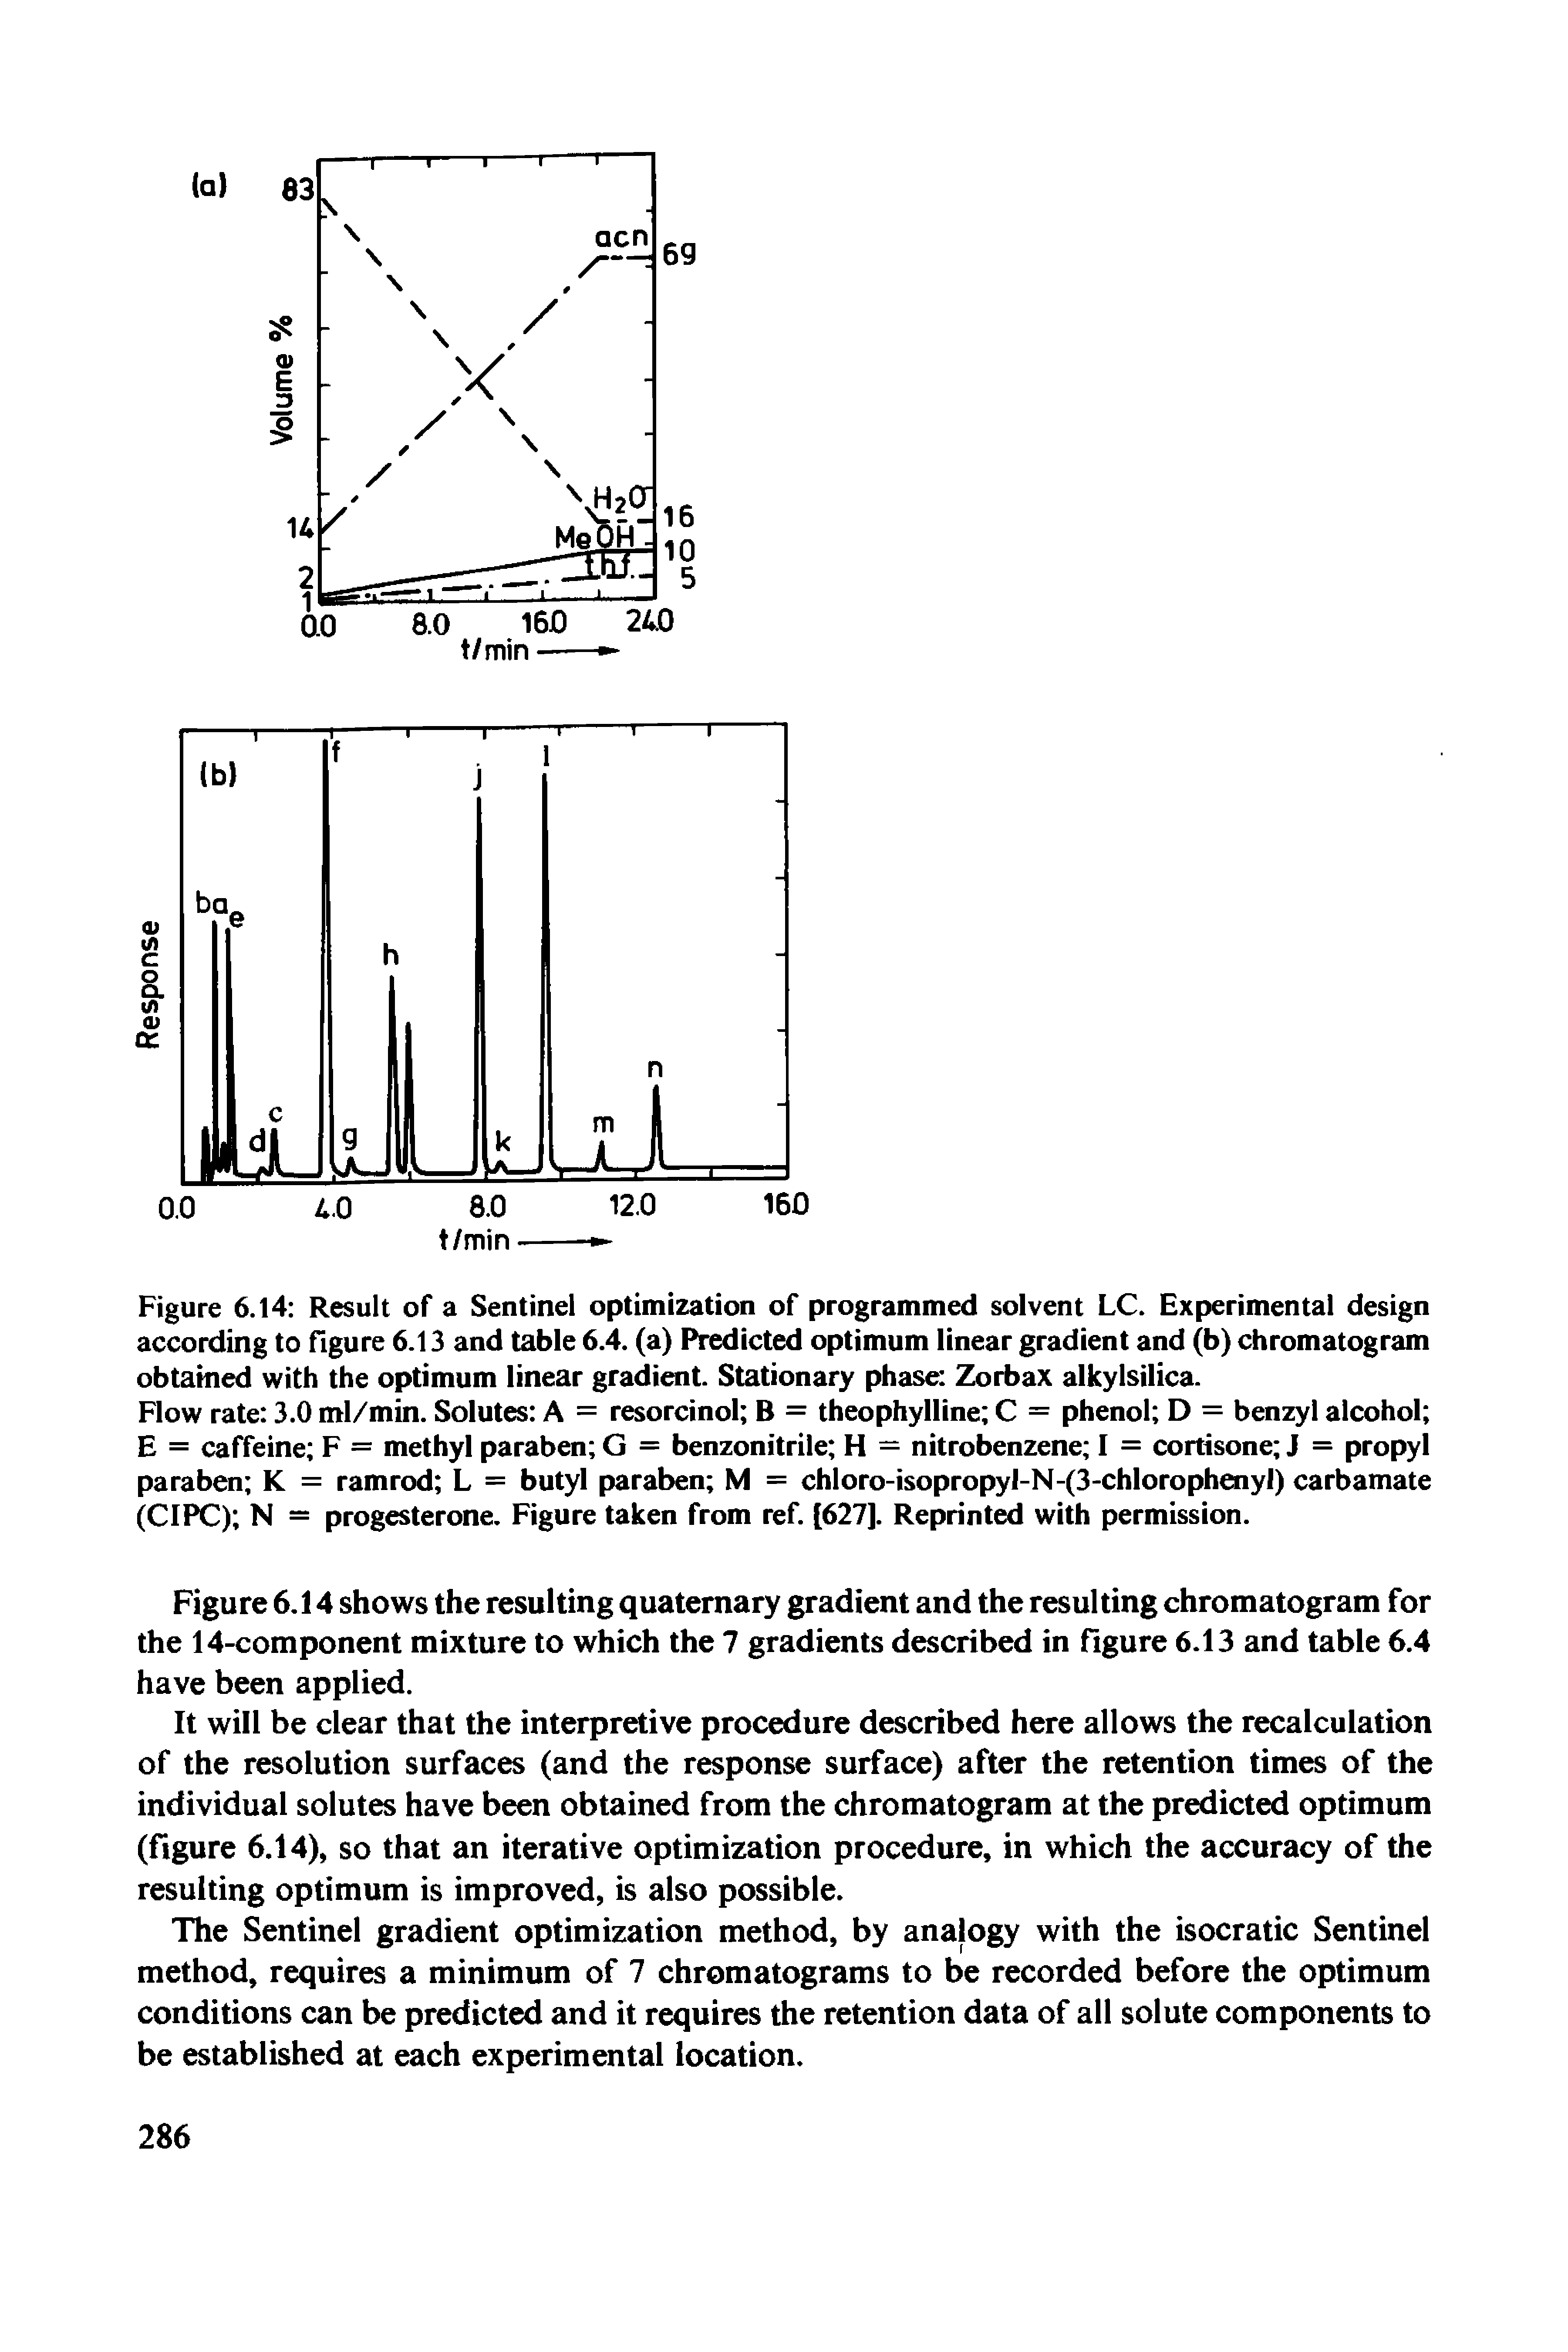 Figure 6.14 Result of a Sentinel optimization of programmed solvent LC. Experimental design according to figure 6.13 and table 6.4. (a) Predicted optimum linear gradient and (b) chromatogram obtained with the optimum linear gradient. Stationary phase Zorbax alkyl silica.